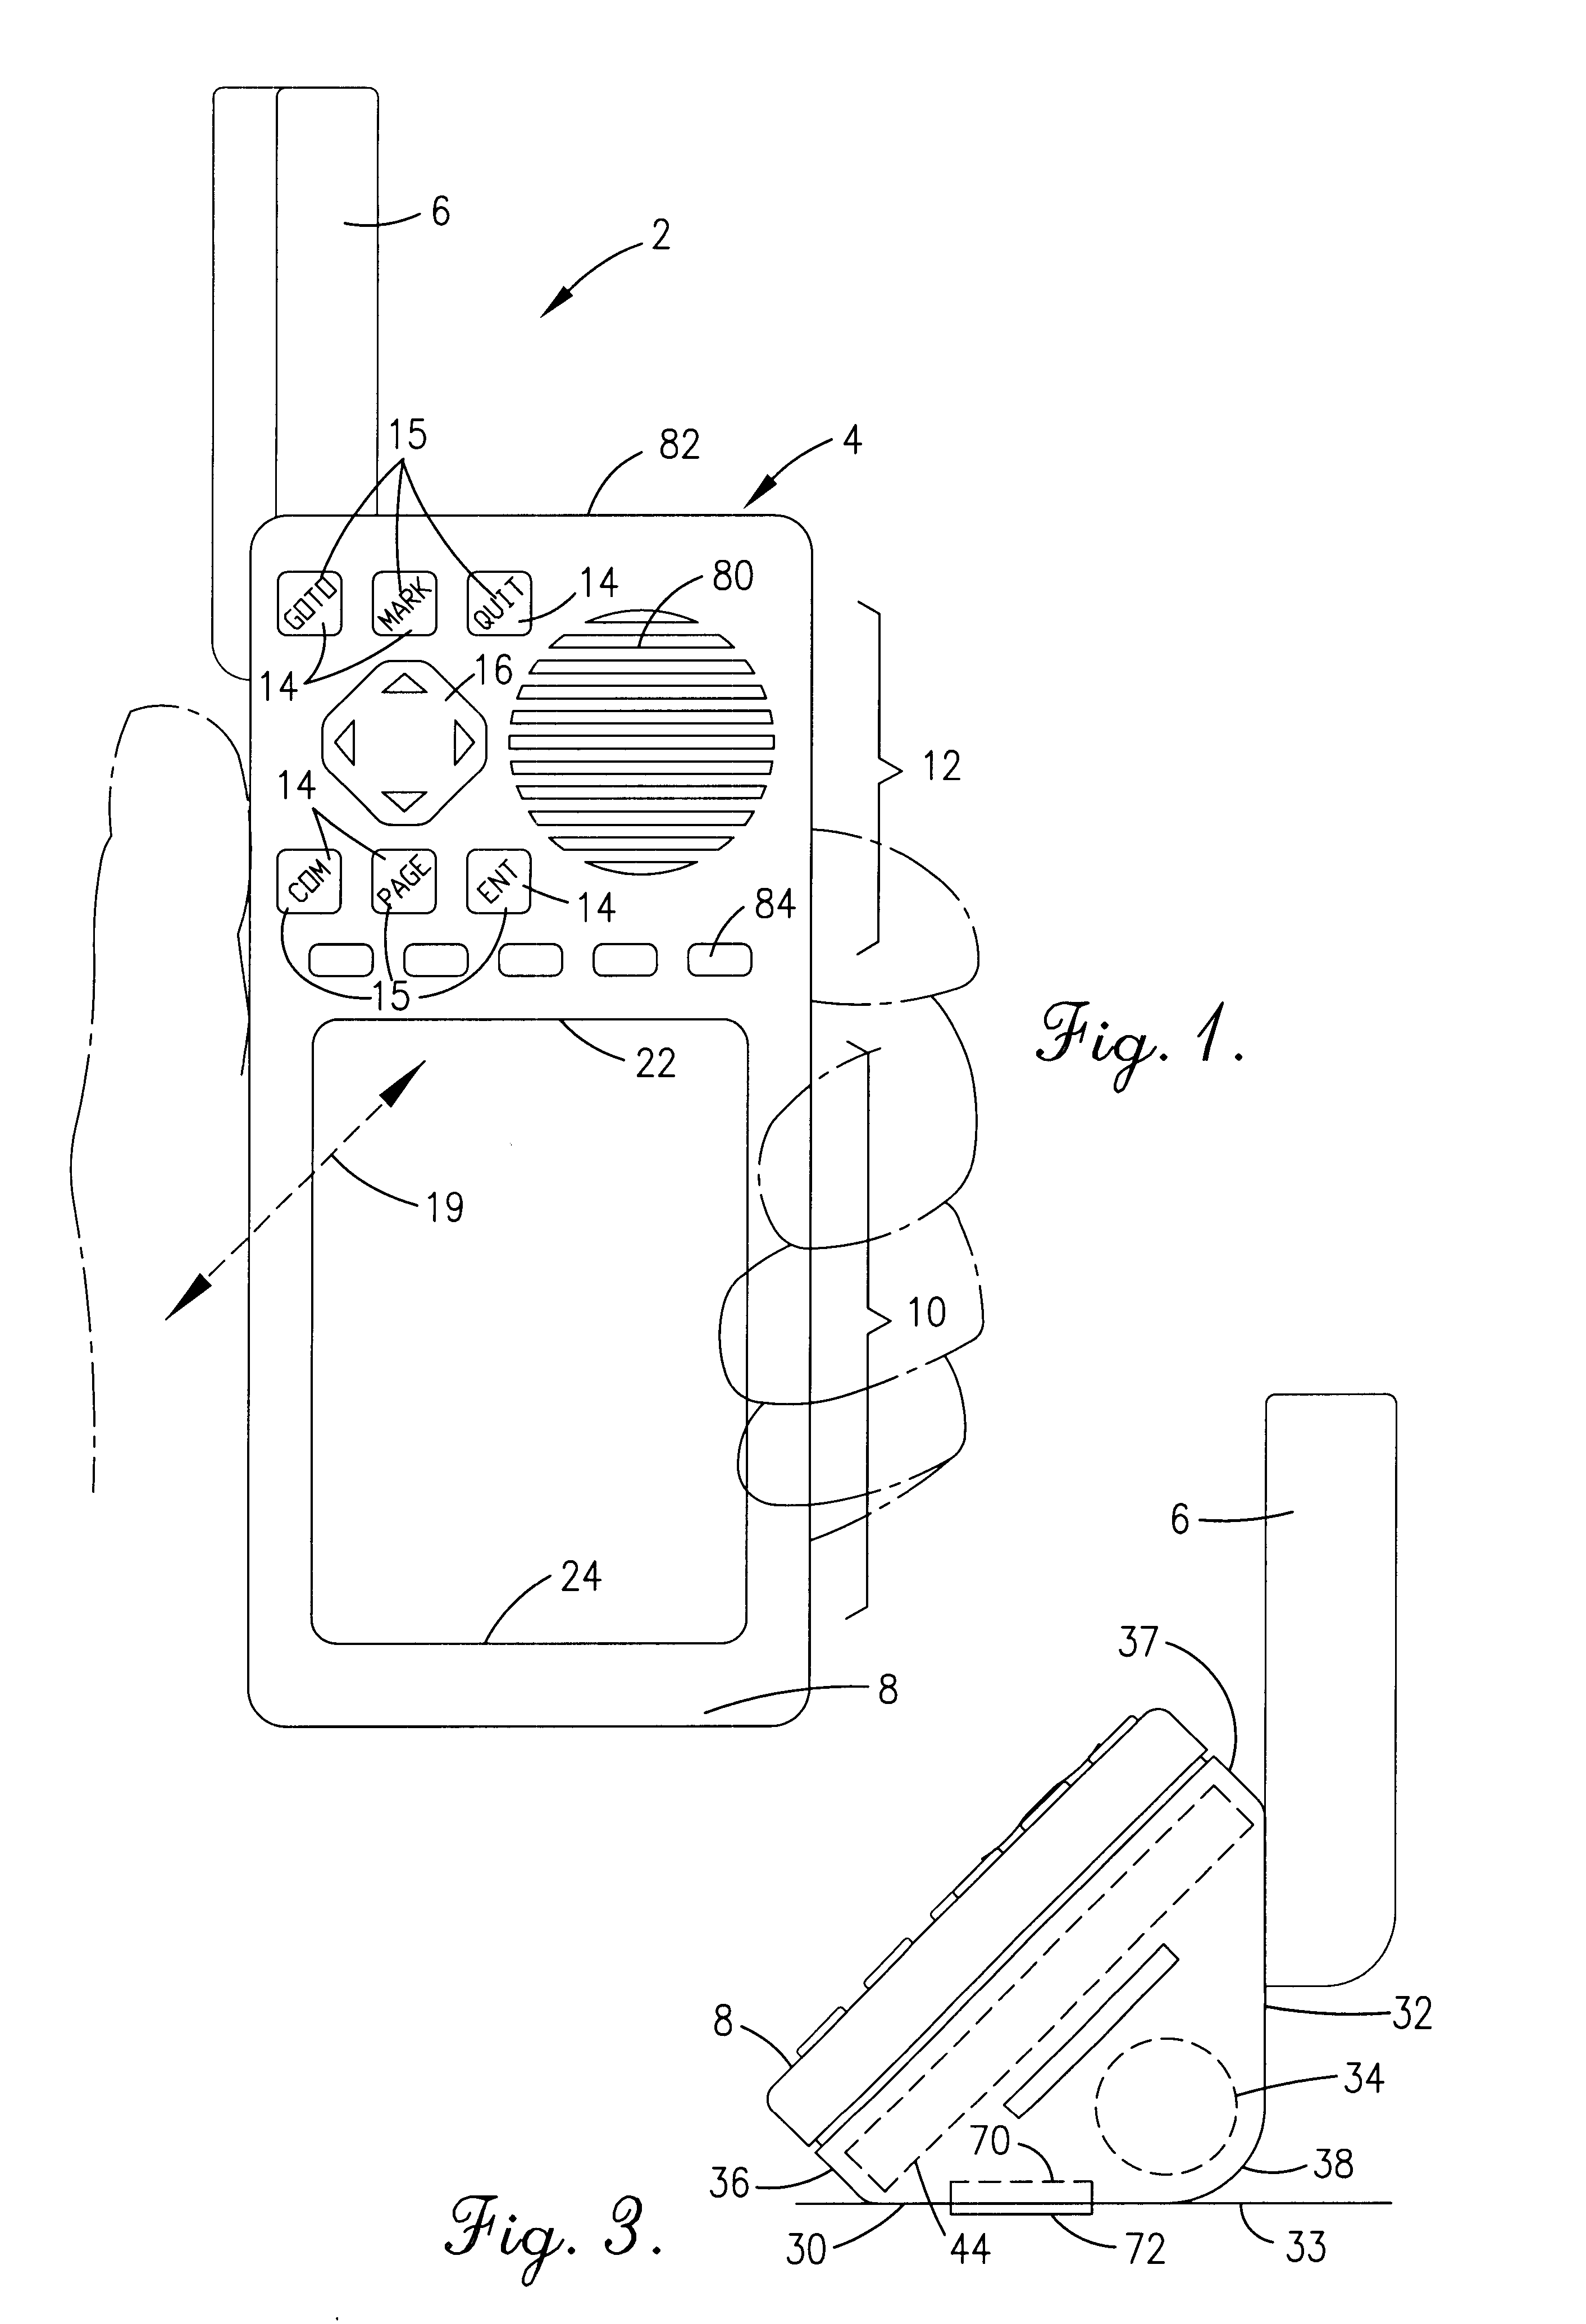 Portable electronic device for use in combination portable and fixed mount applications